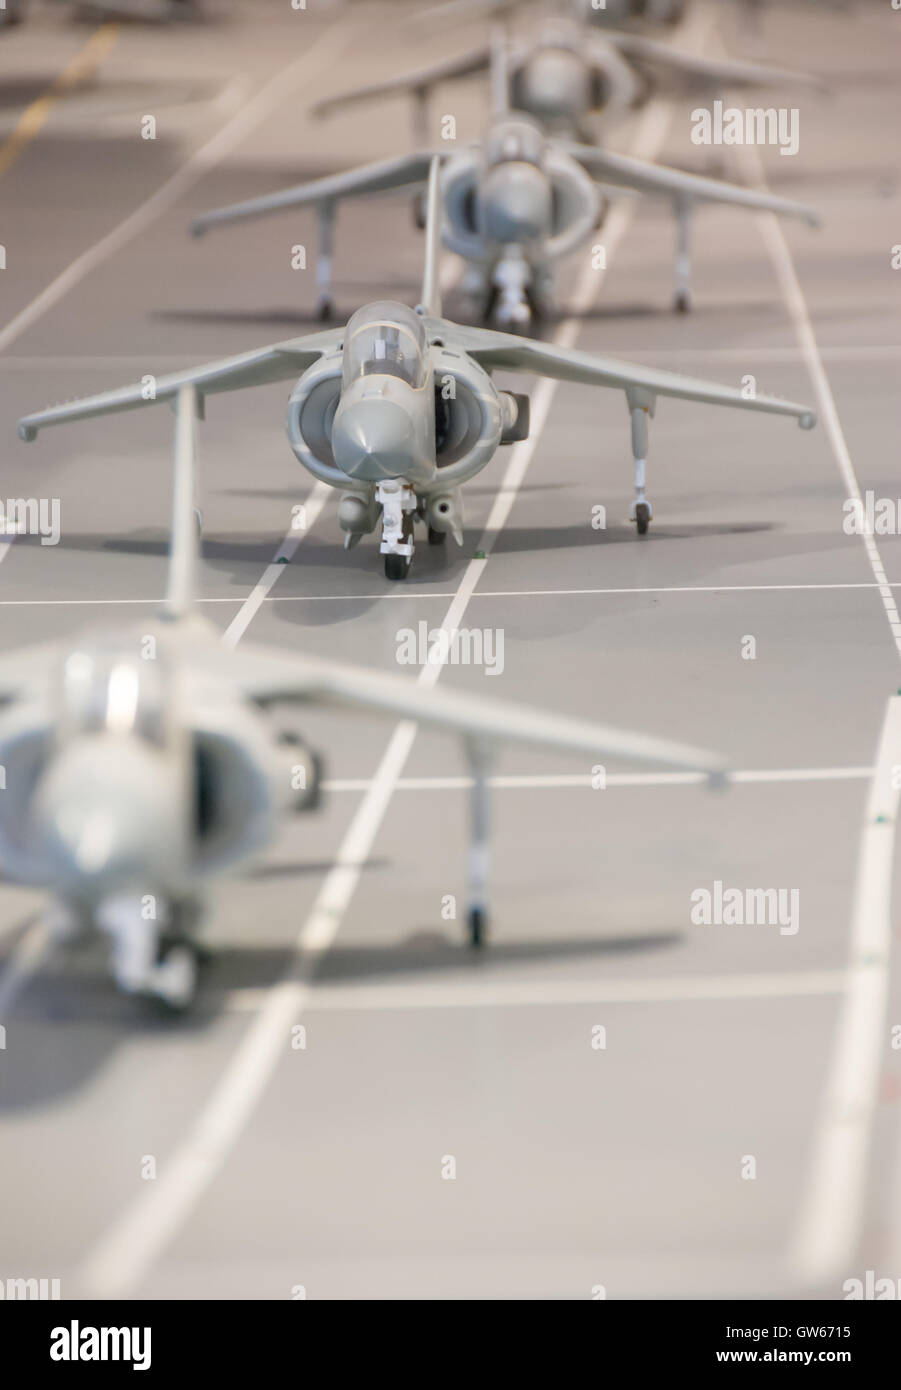 Models of vertical take-off fighter on a runway Stock Photo